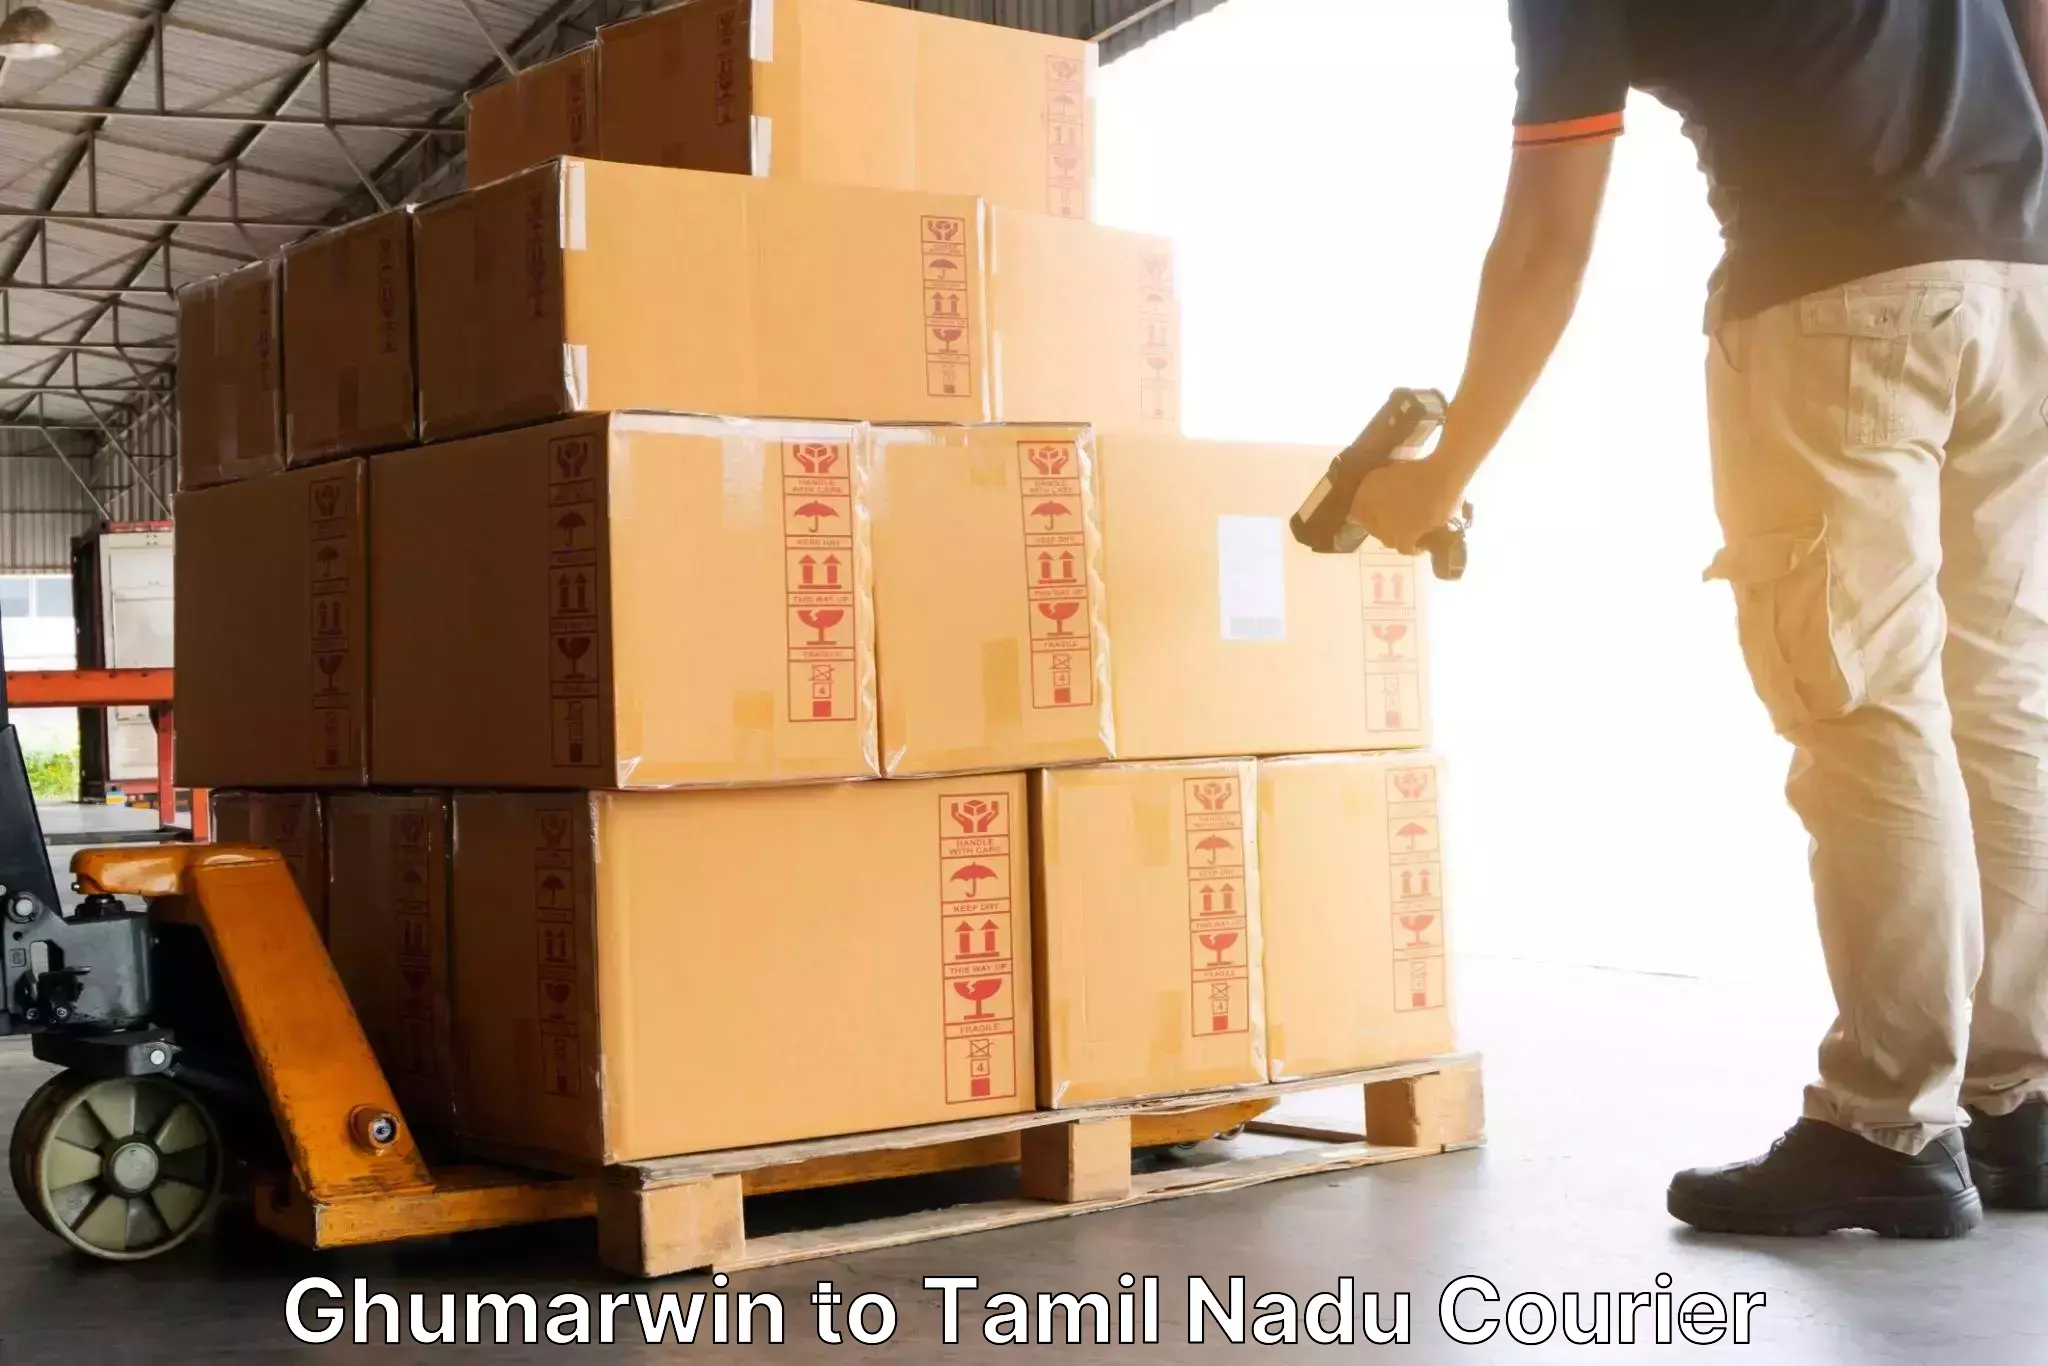 Courier service innovation Ghumarwin to Namakkal